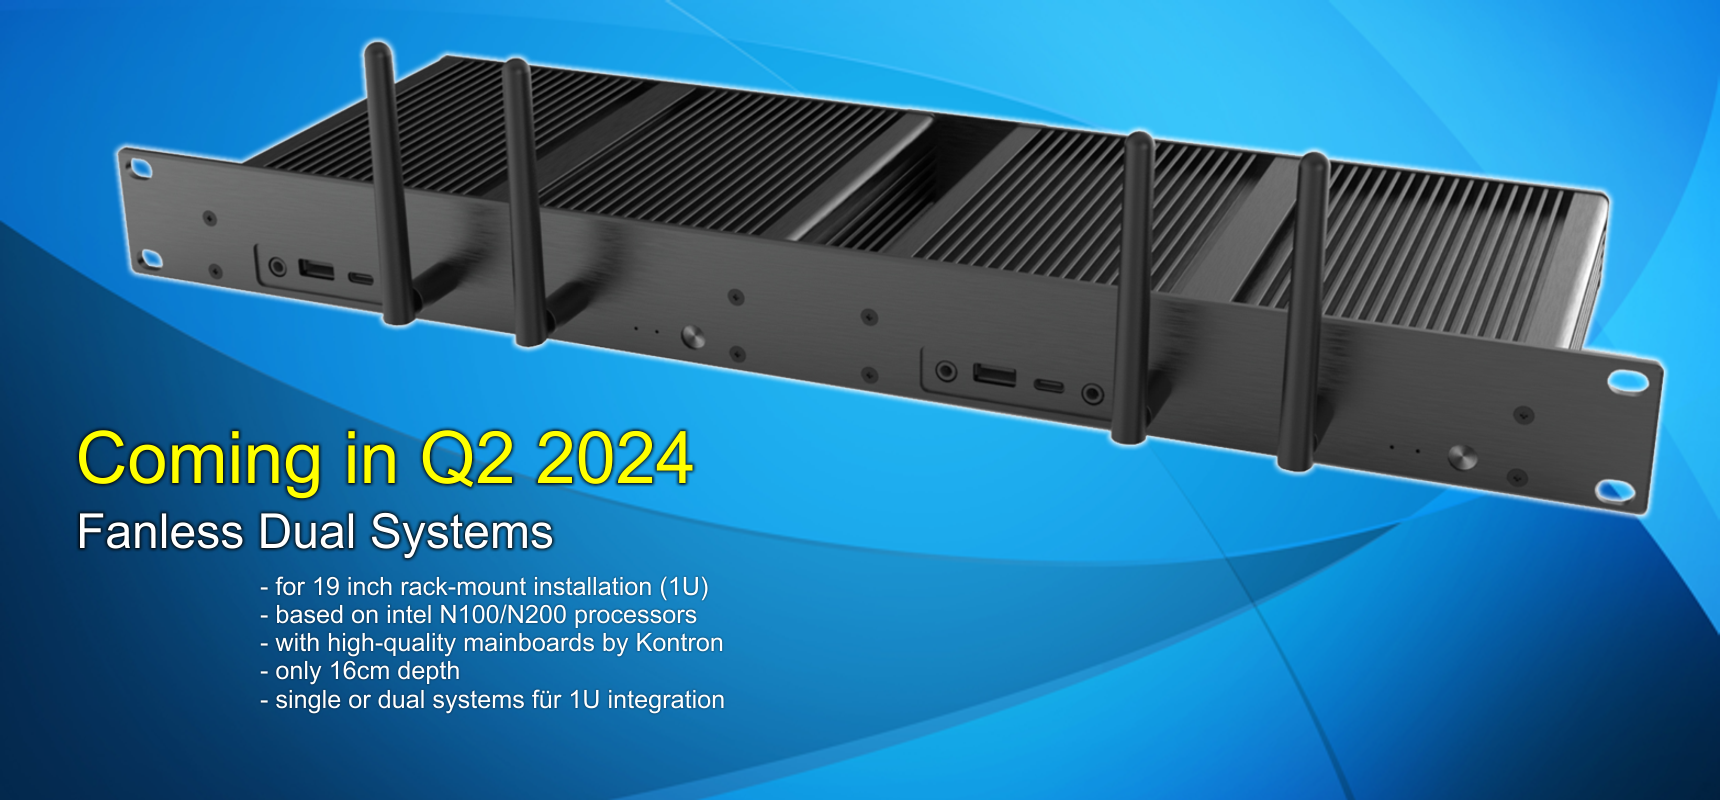 New fanless systems coming in 2024